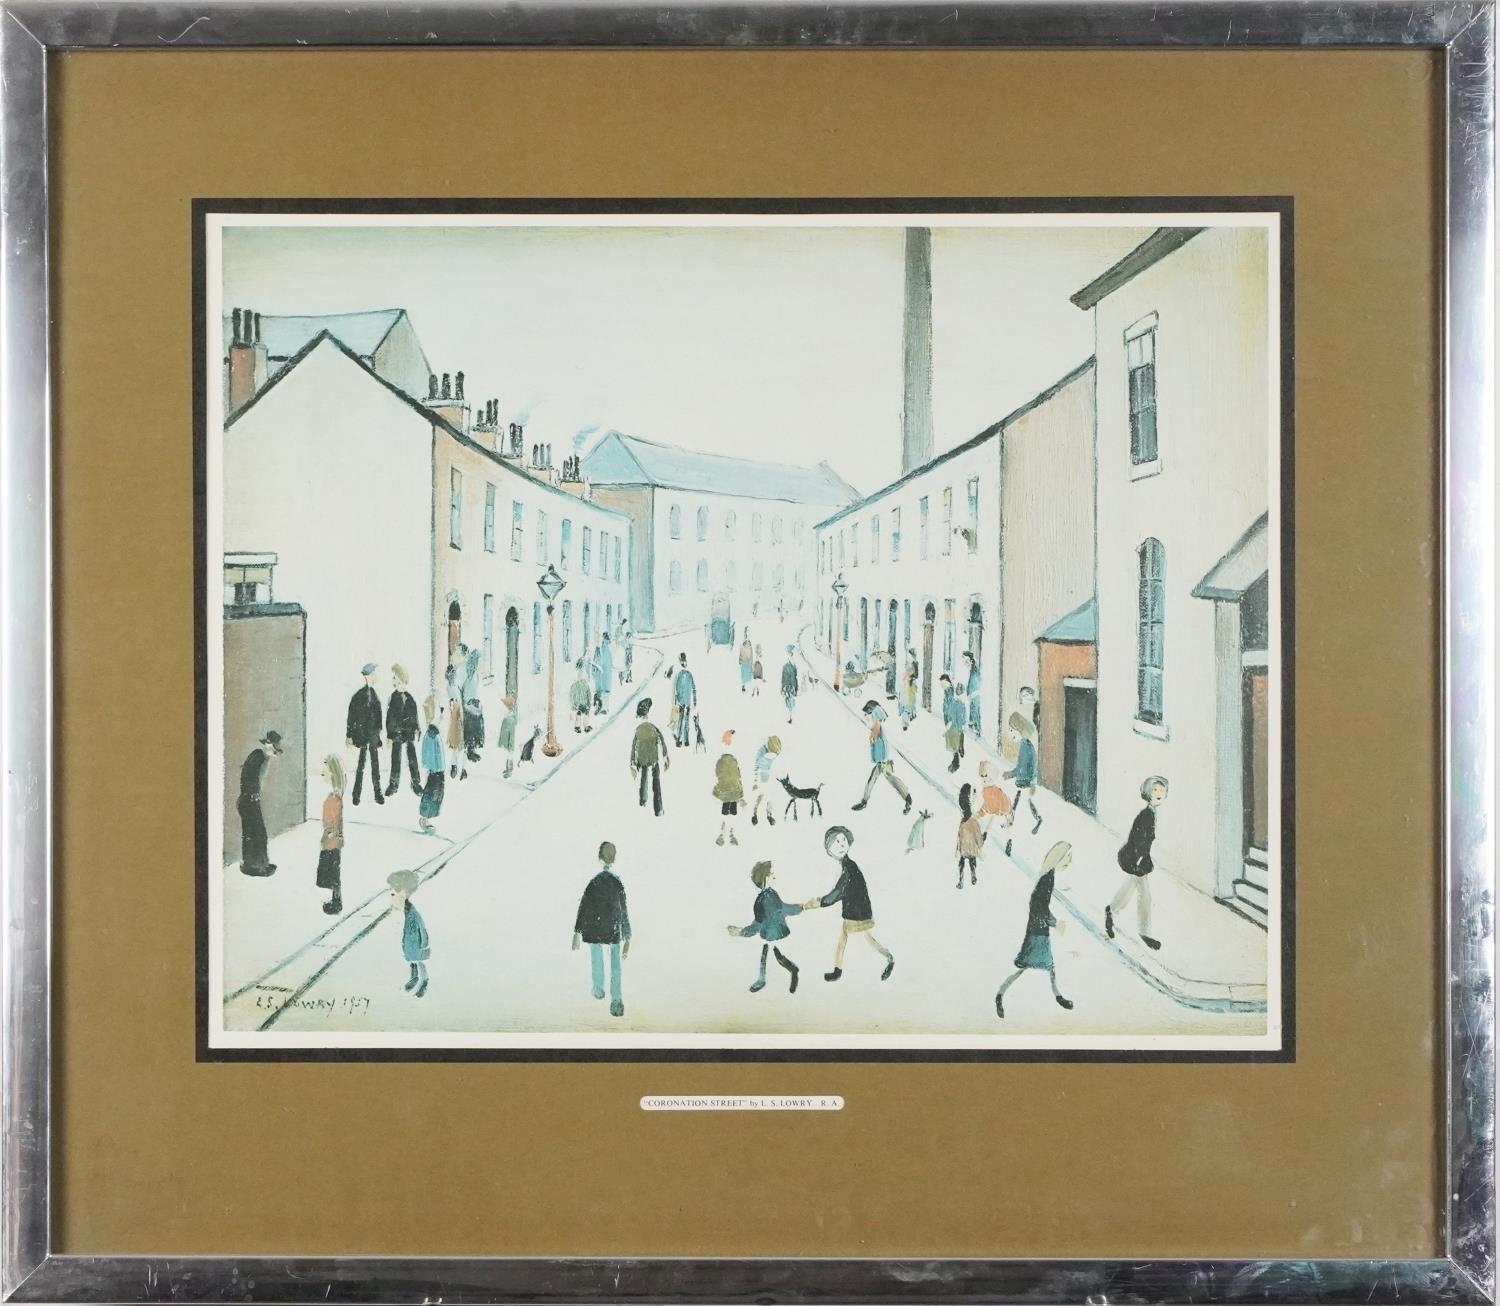 After Laurence Stephen Lowry - Coronation Street, vintage print in colour, mounted, Manchester stamp - Image 2 of 5